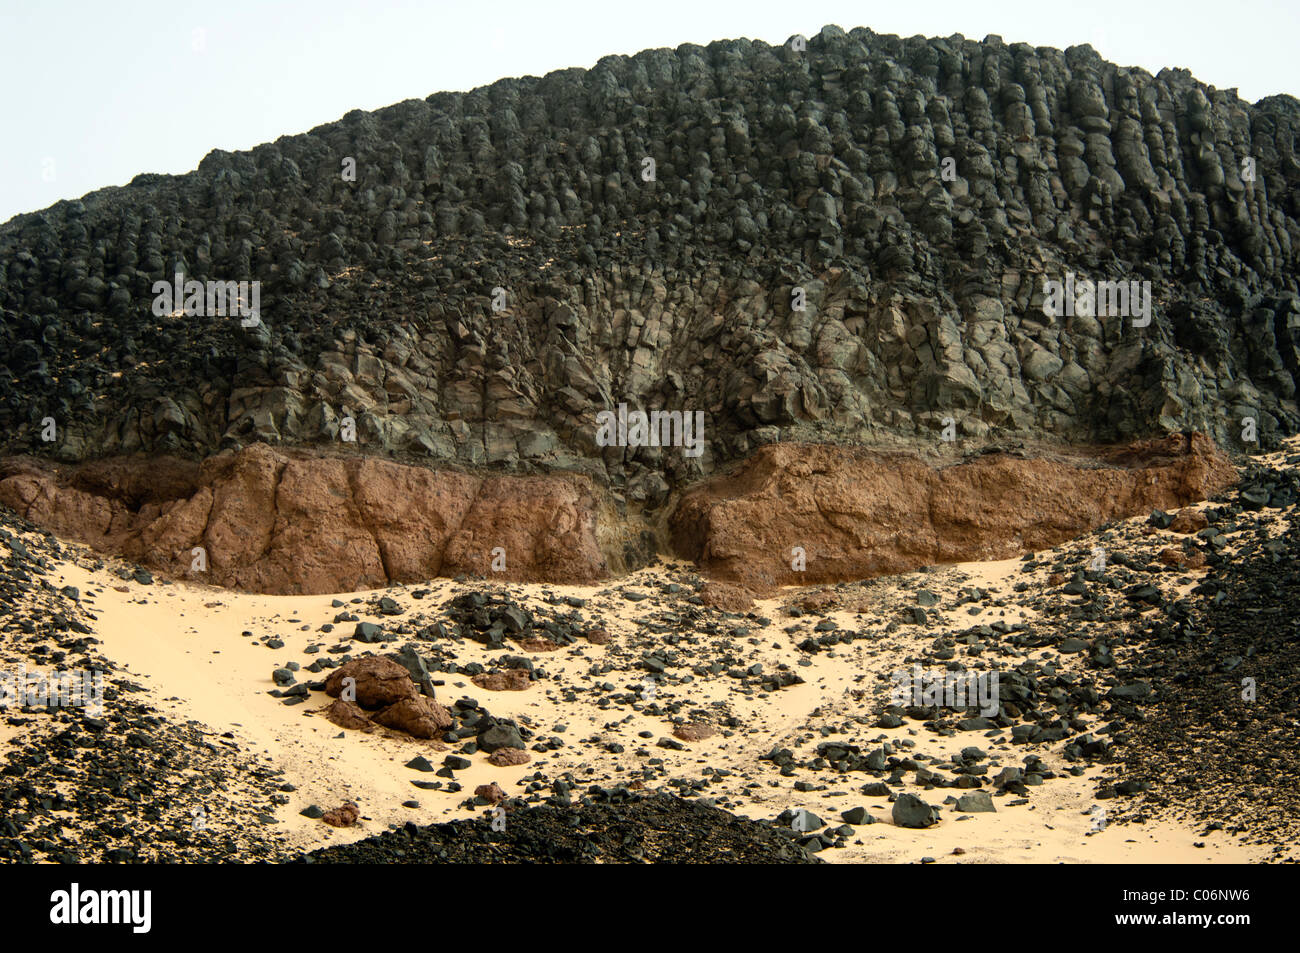 The Black Desert of Western Egypt-top layer of basalt rock sitting on top a layer of softer soil baked by the heat Stock Photo